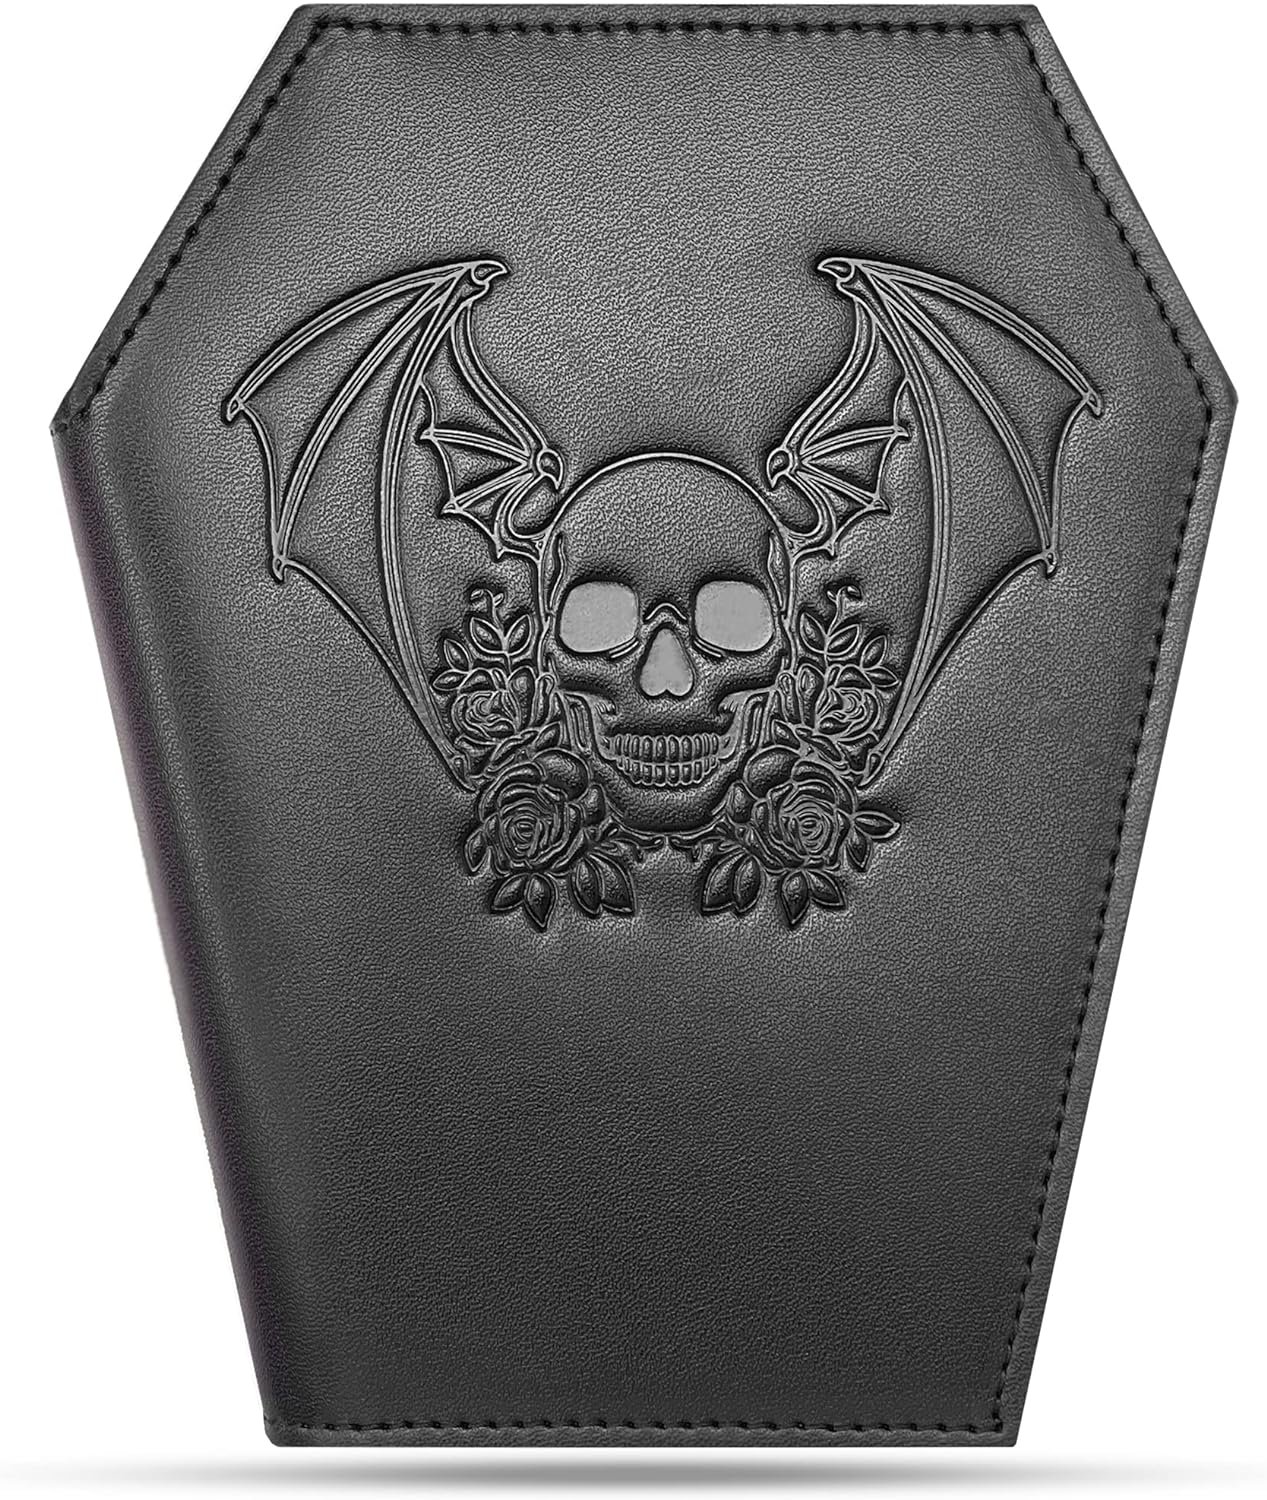 Coffin Wallet – Spooky Gothic Wallet Review